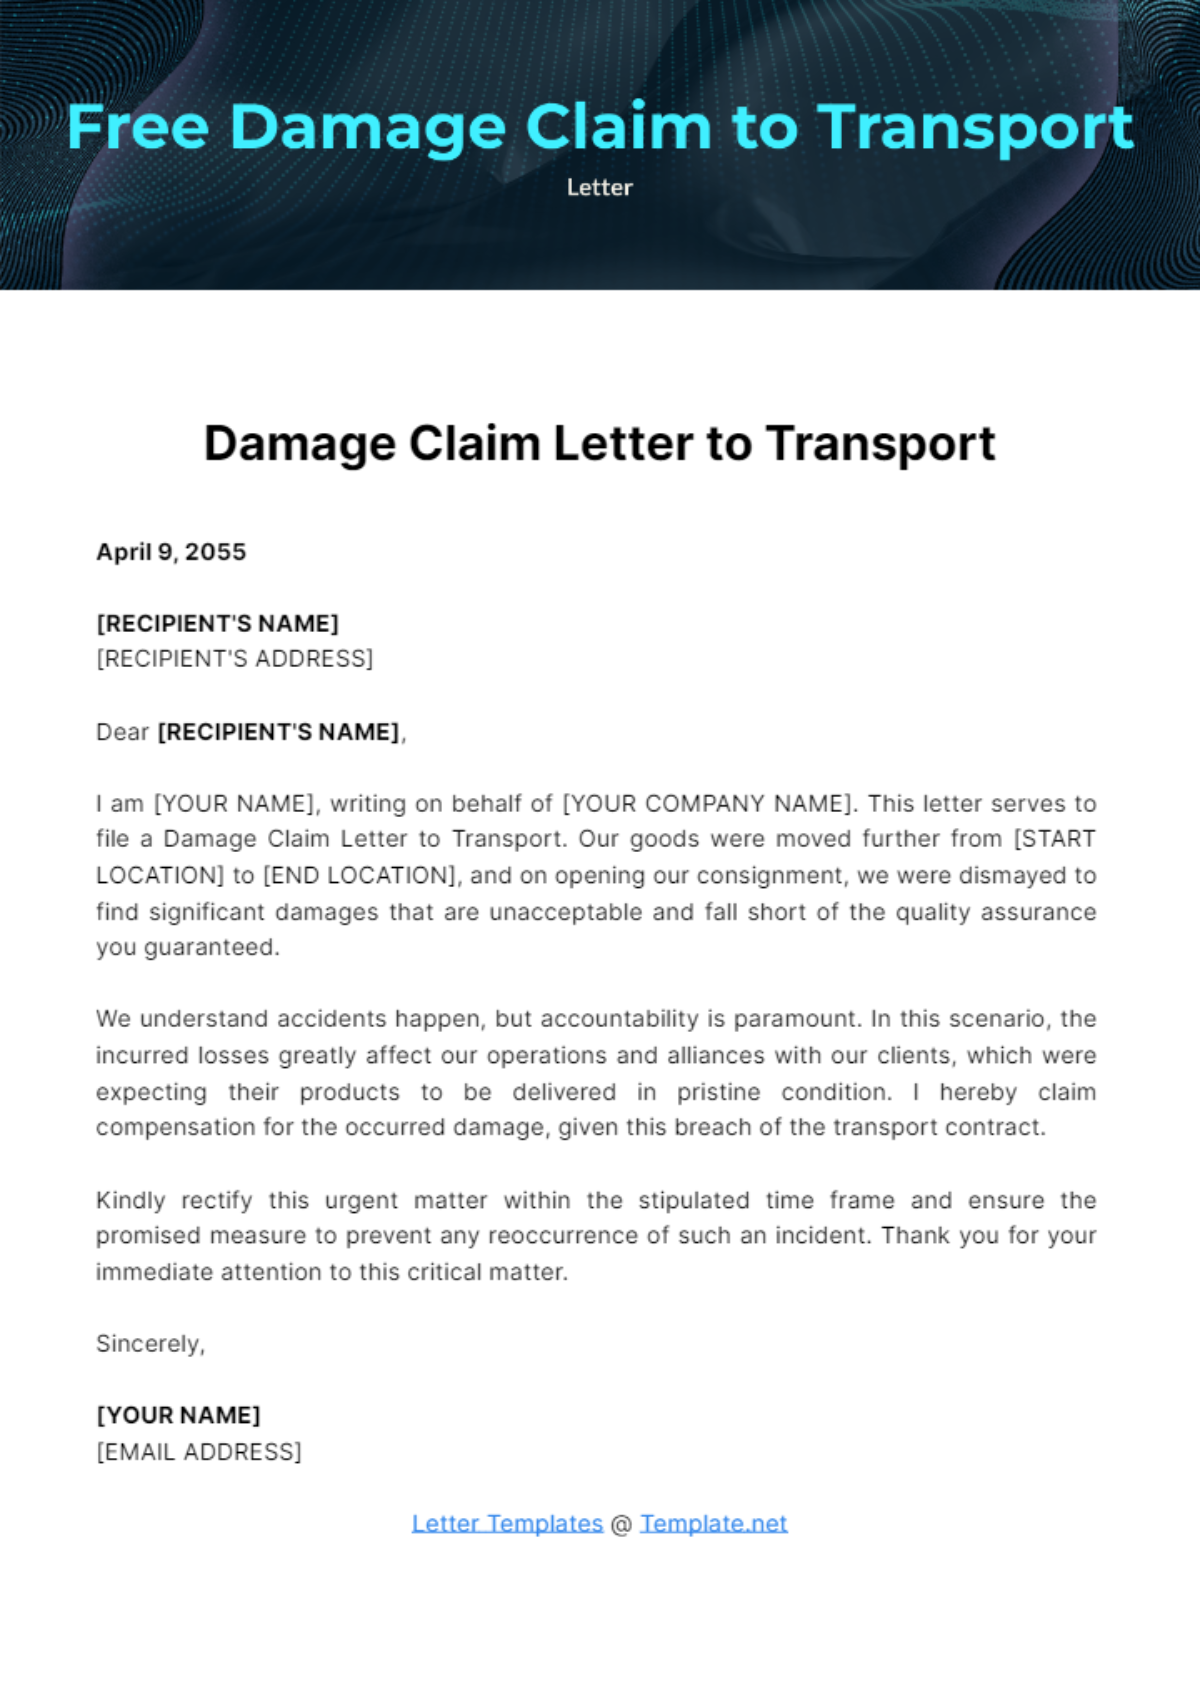 Free Damage Claim Letter to Transport Template